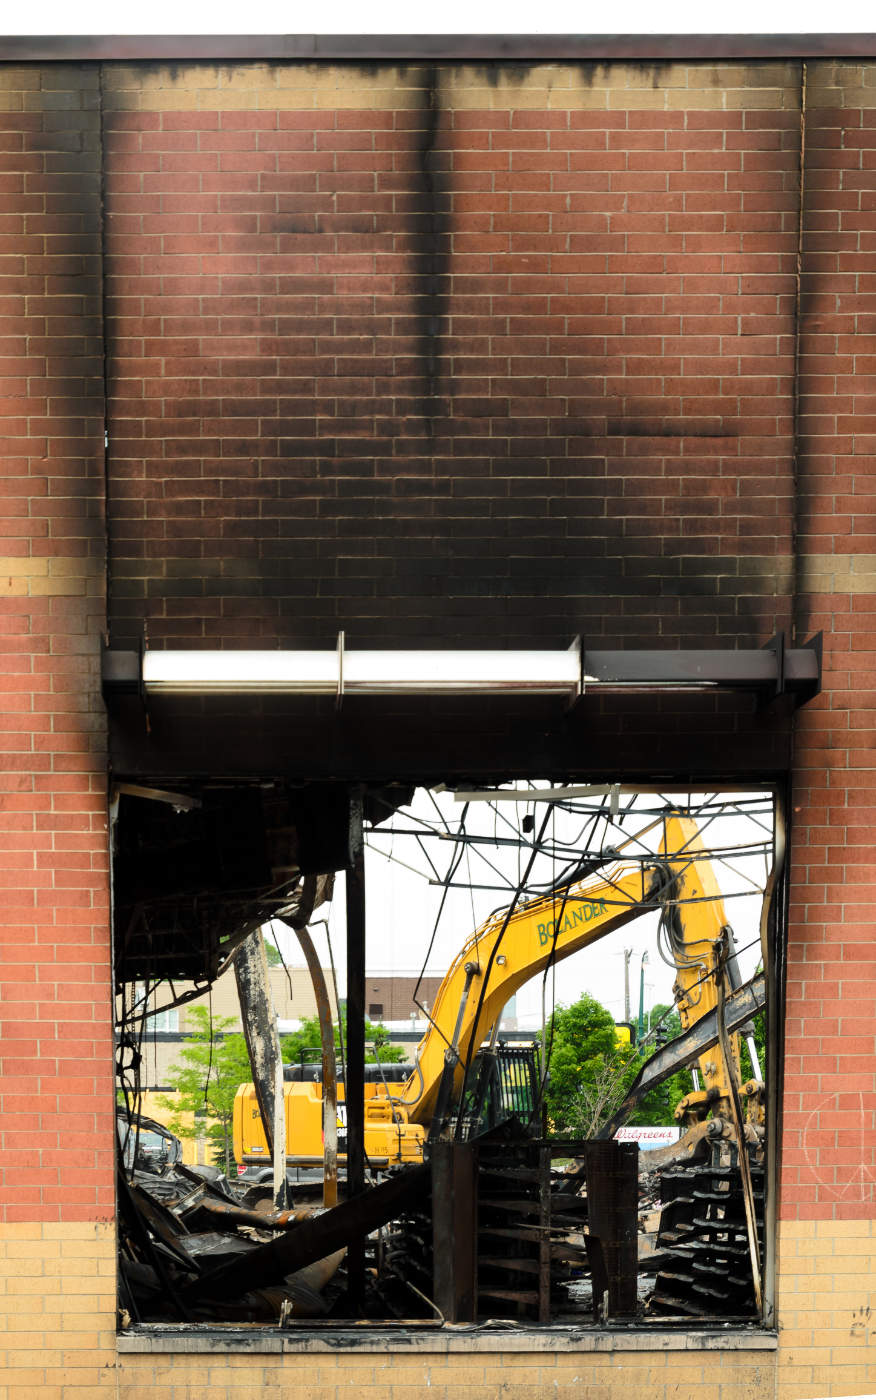 Looking through a burnt hole in a brick wall with a construction crane in the background